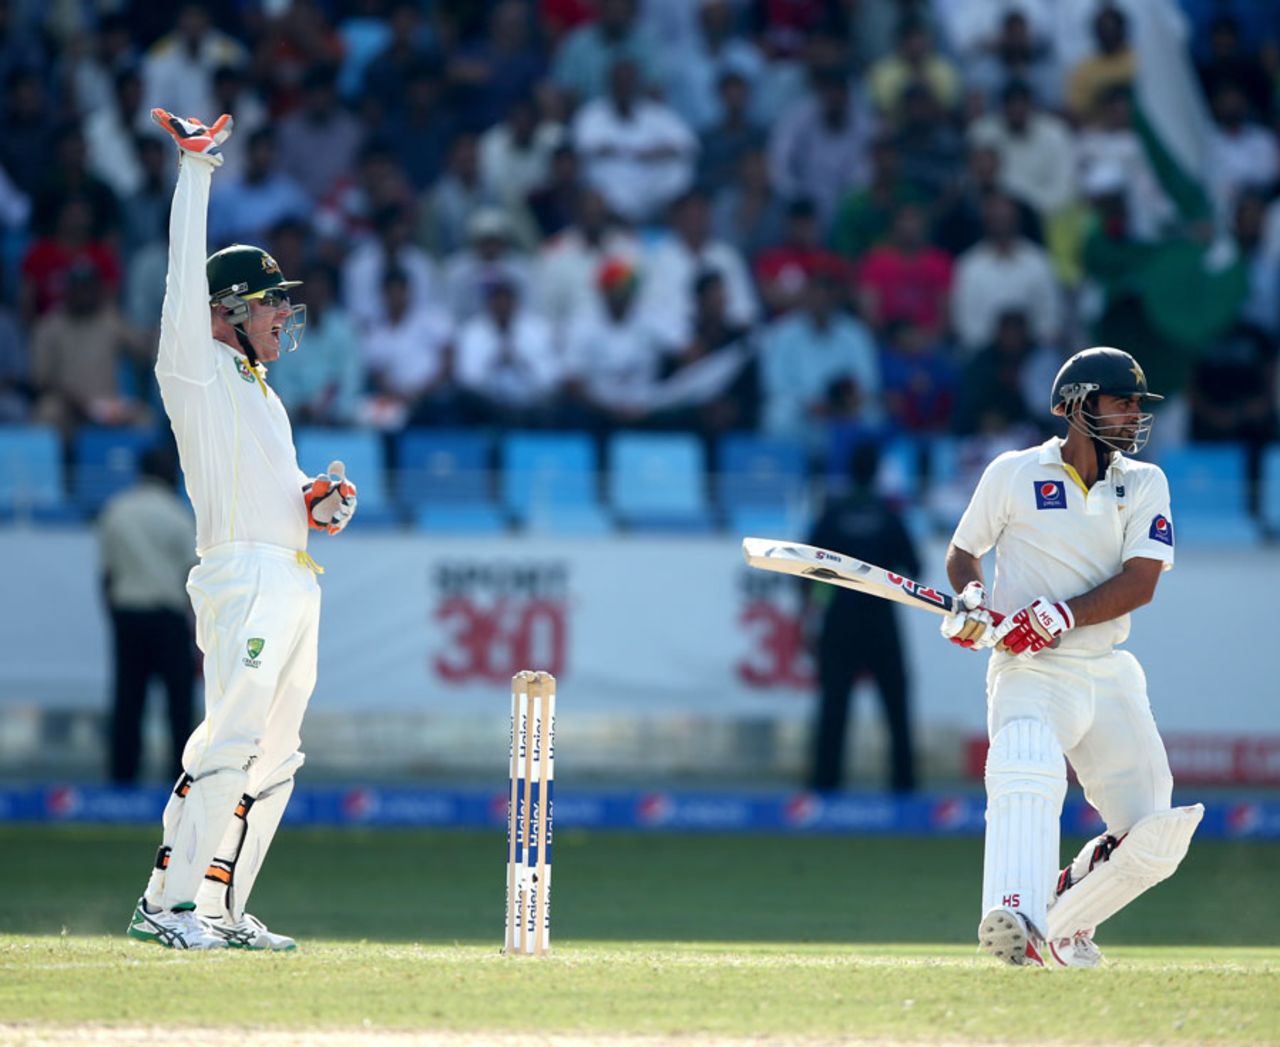 Ahmed Shehzad was trapped lbw for 131, Pakistan v Australia, 1st Test, Dubai, 4th day, October 25, 2014